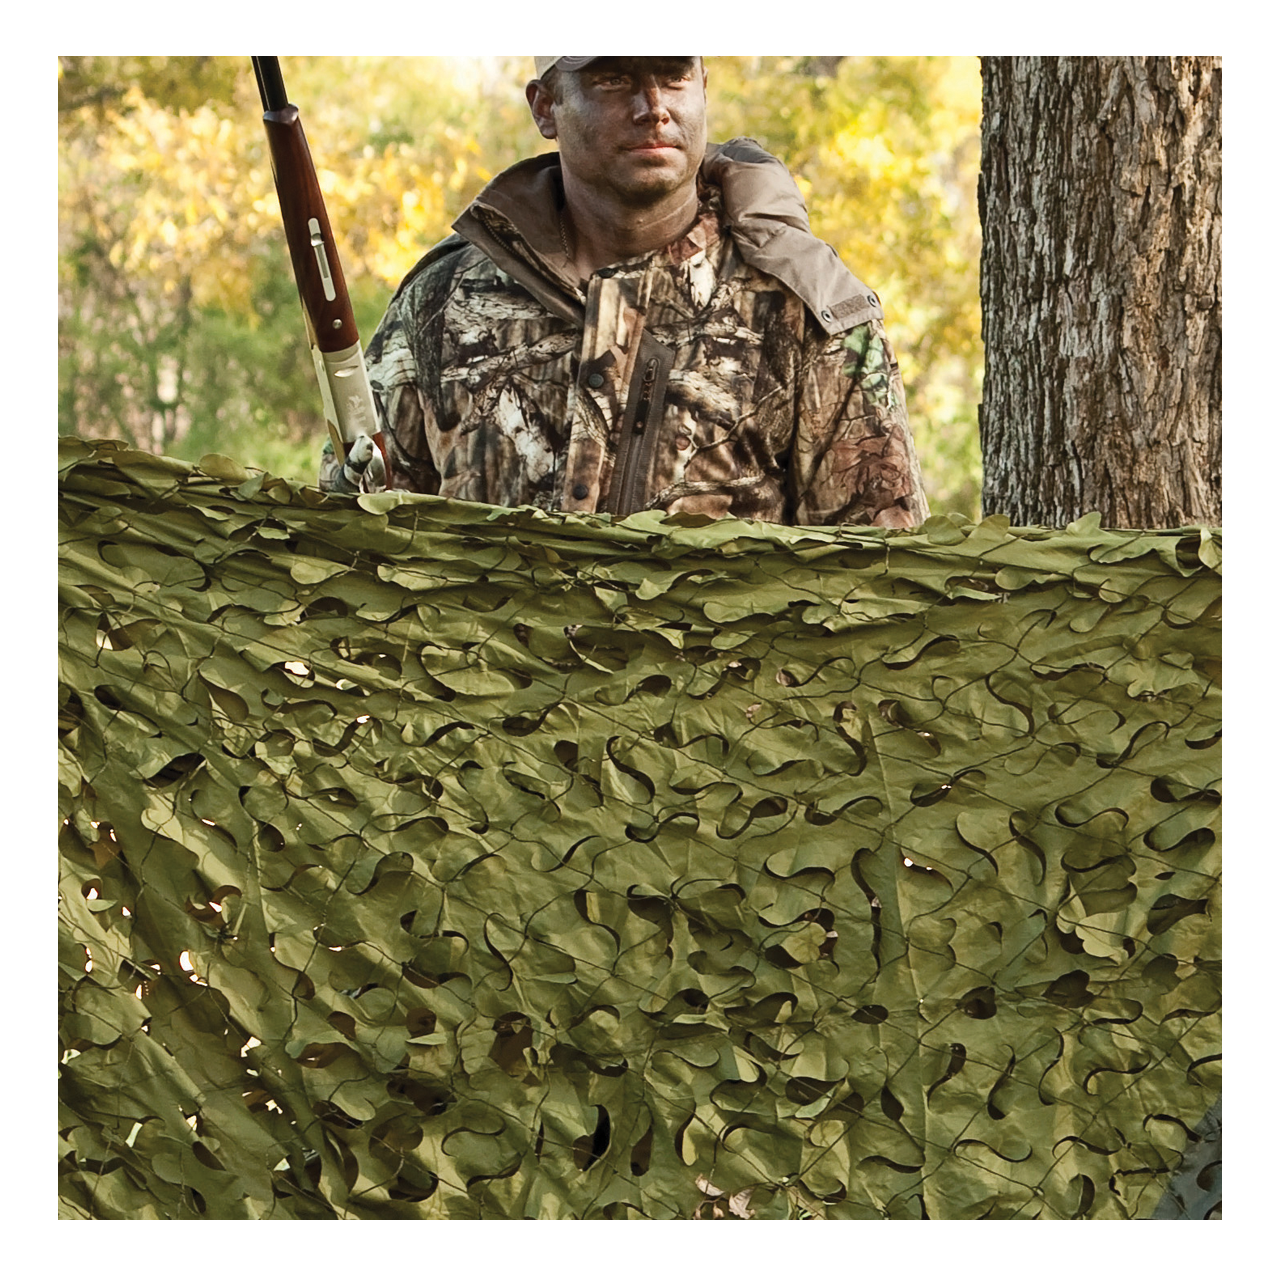 Woodland Camouflage Netting Military Camo Hunting Cover Net Backing Camping 